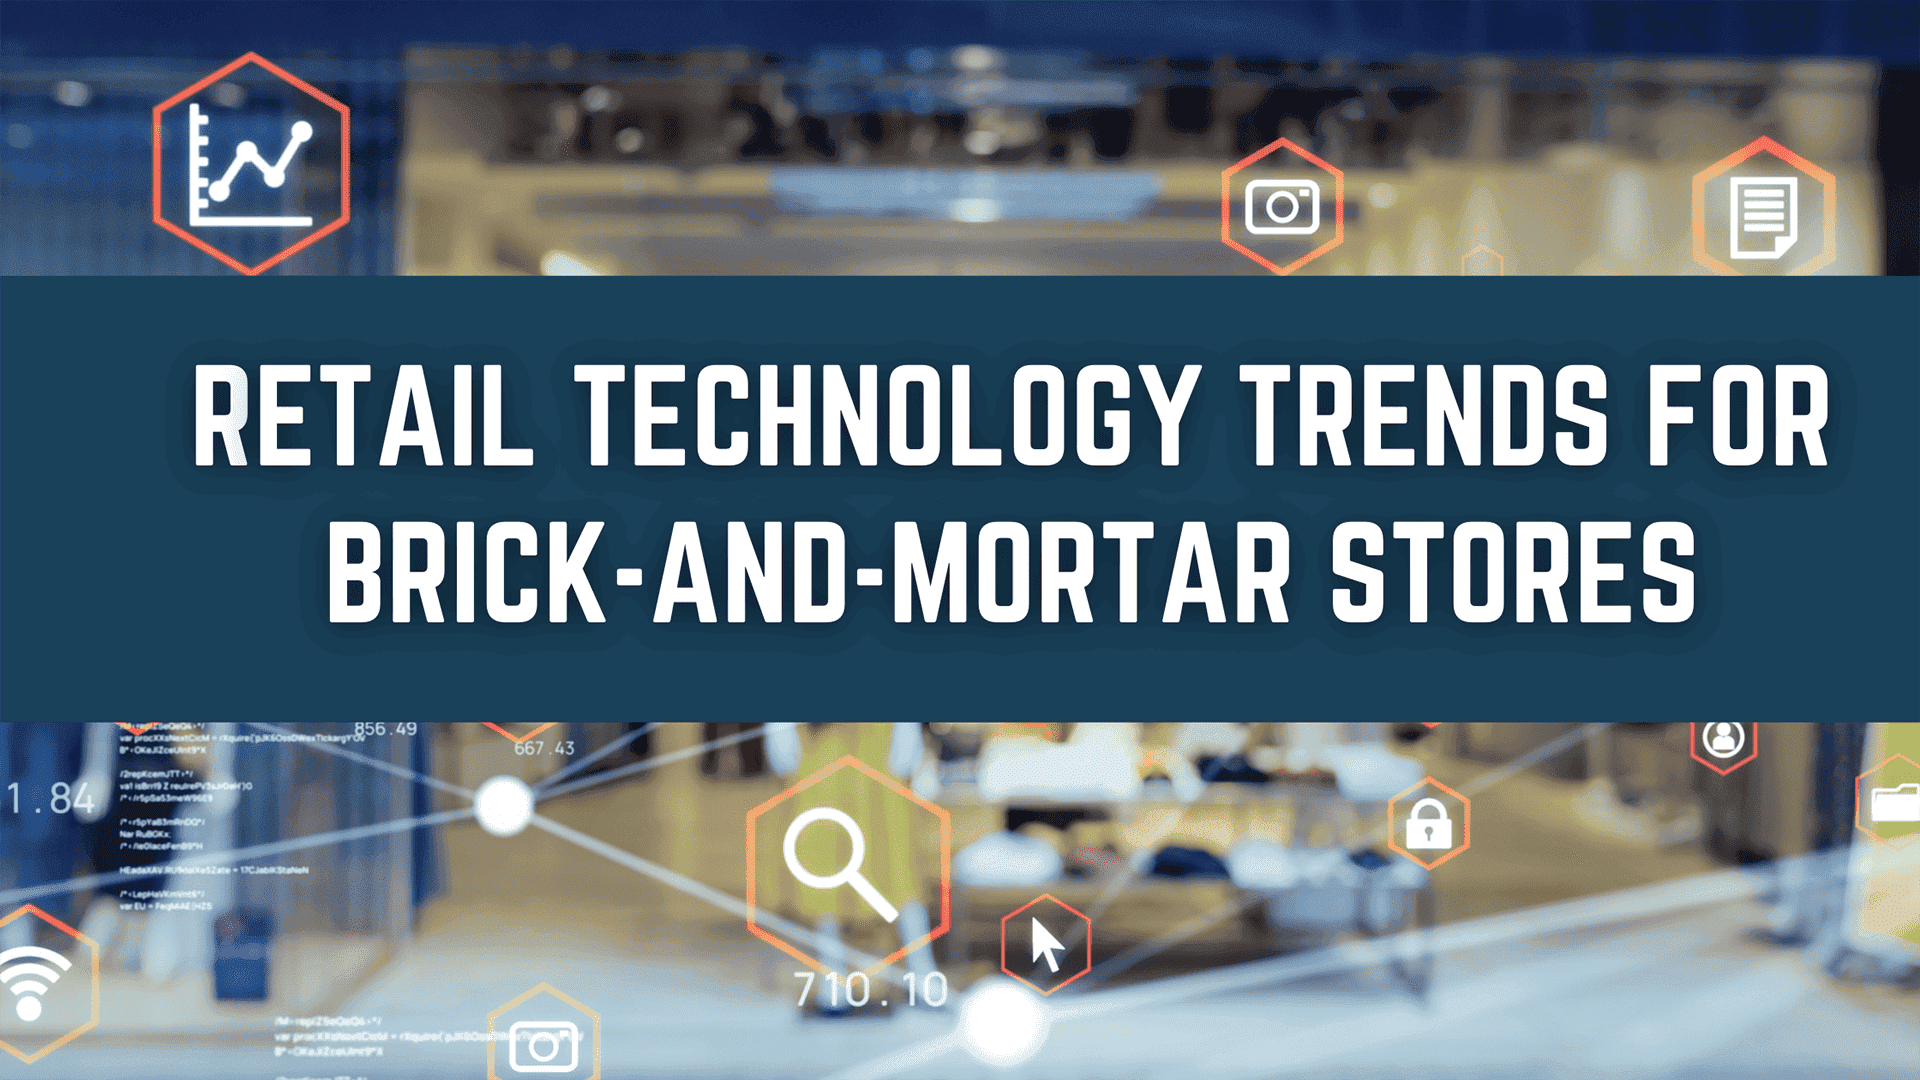 Retail Innovation: Retail Technology Trends for Brick-and-Mortar Stores